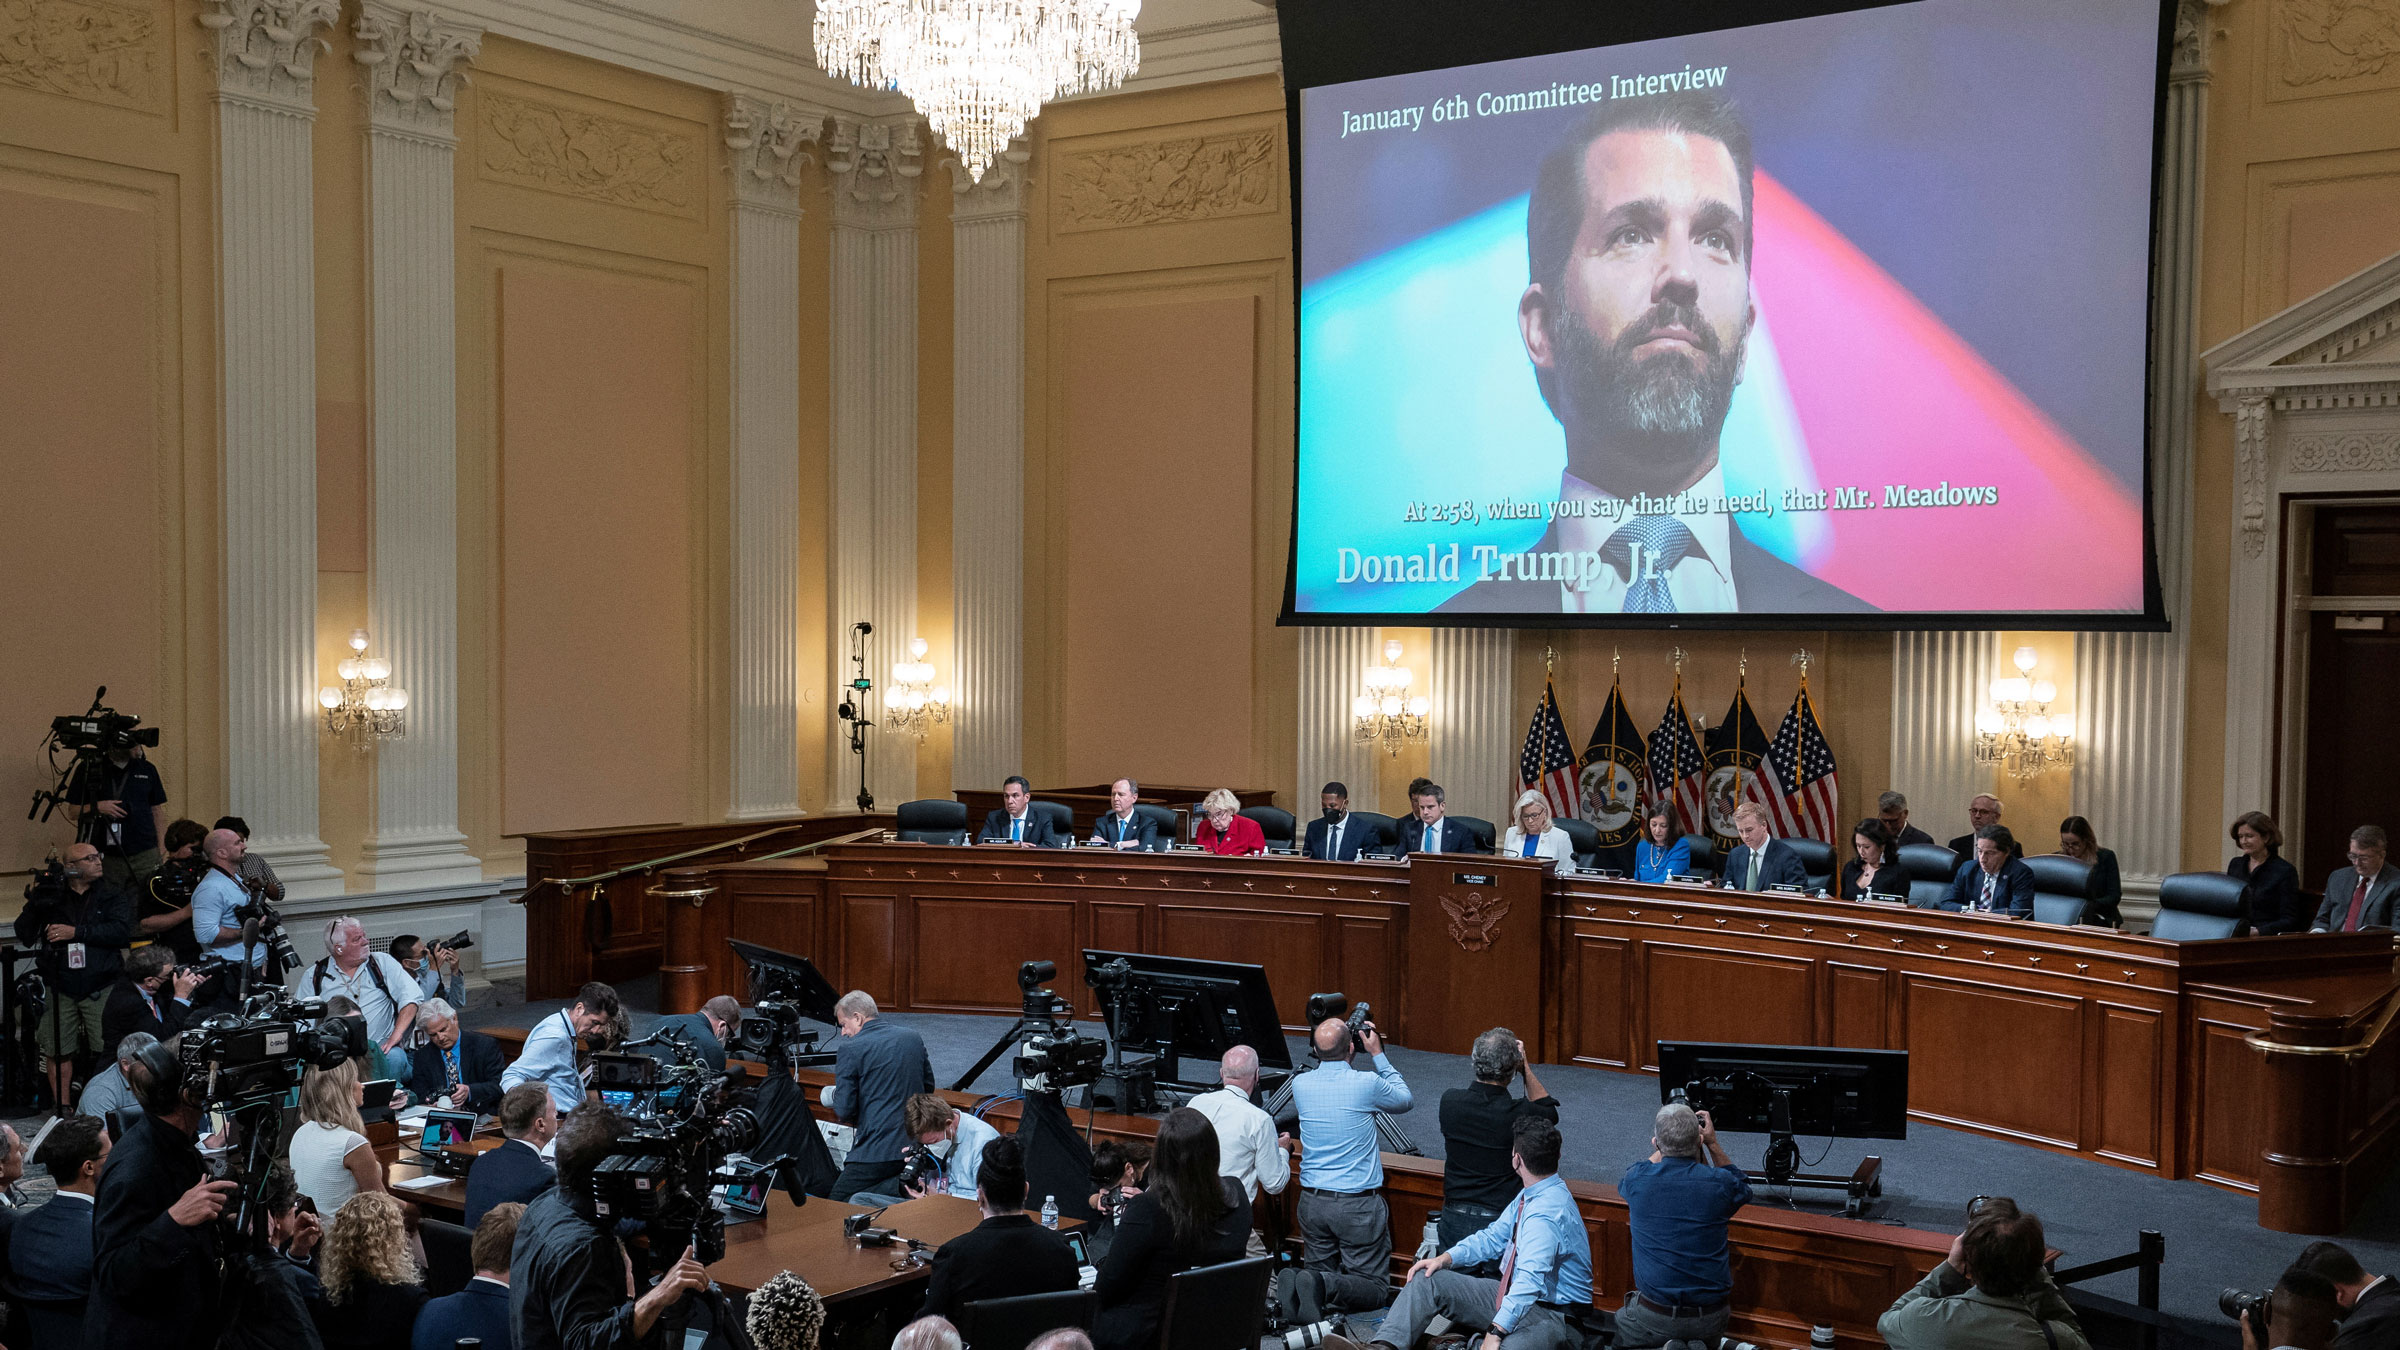 A still image of Donald Trump Jr. is seen on a screen as audio from his deposition is played during Thursday's hearing.